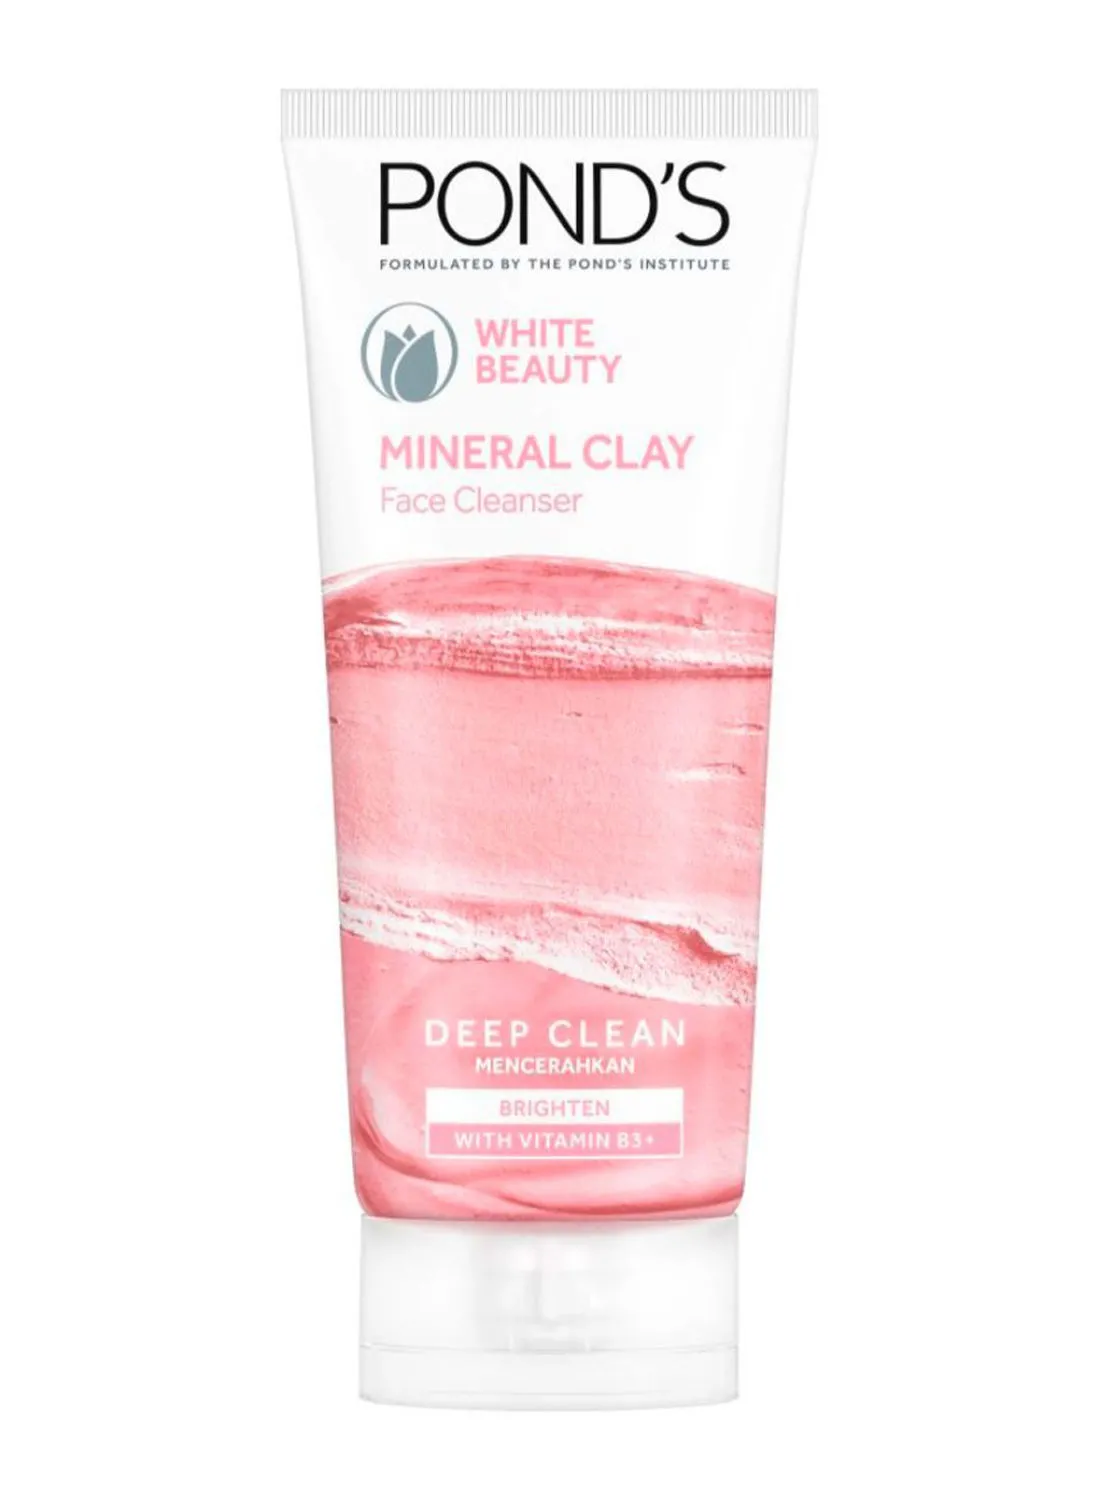 Pond's Mineral Clay Face Cleanser 90grams